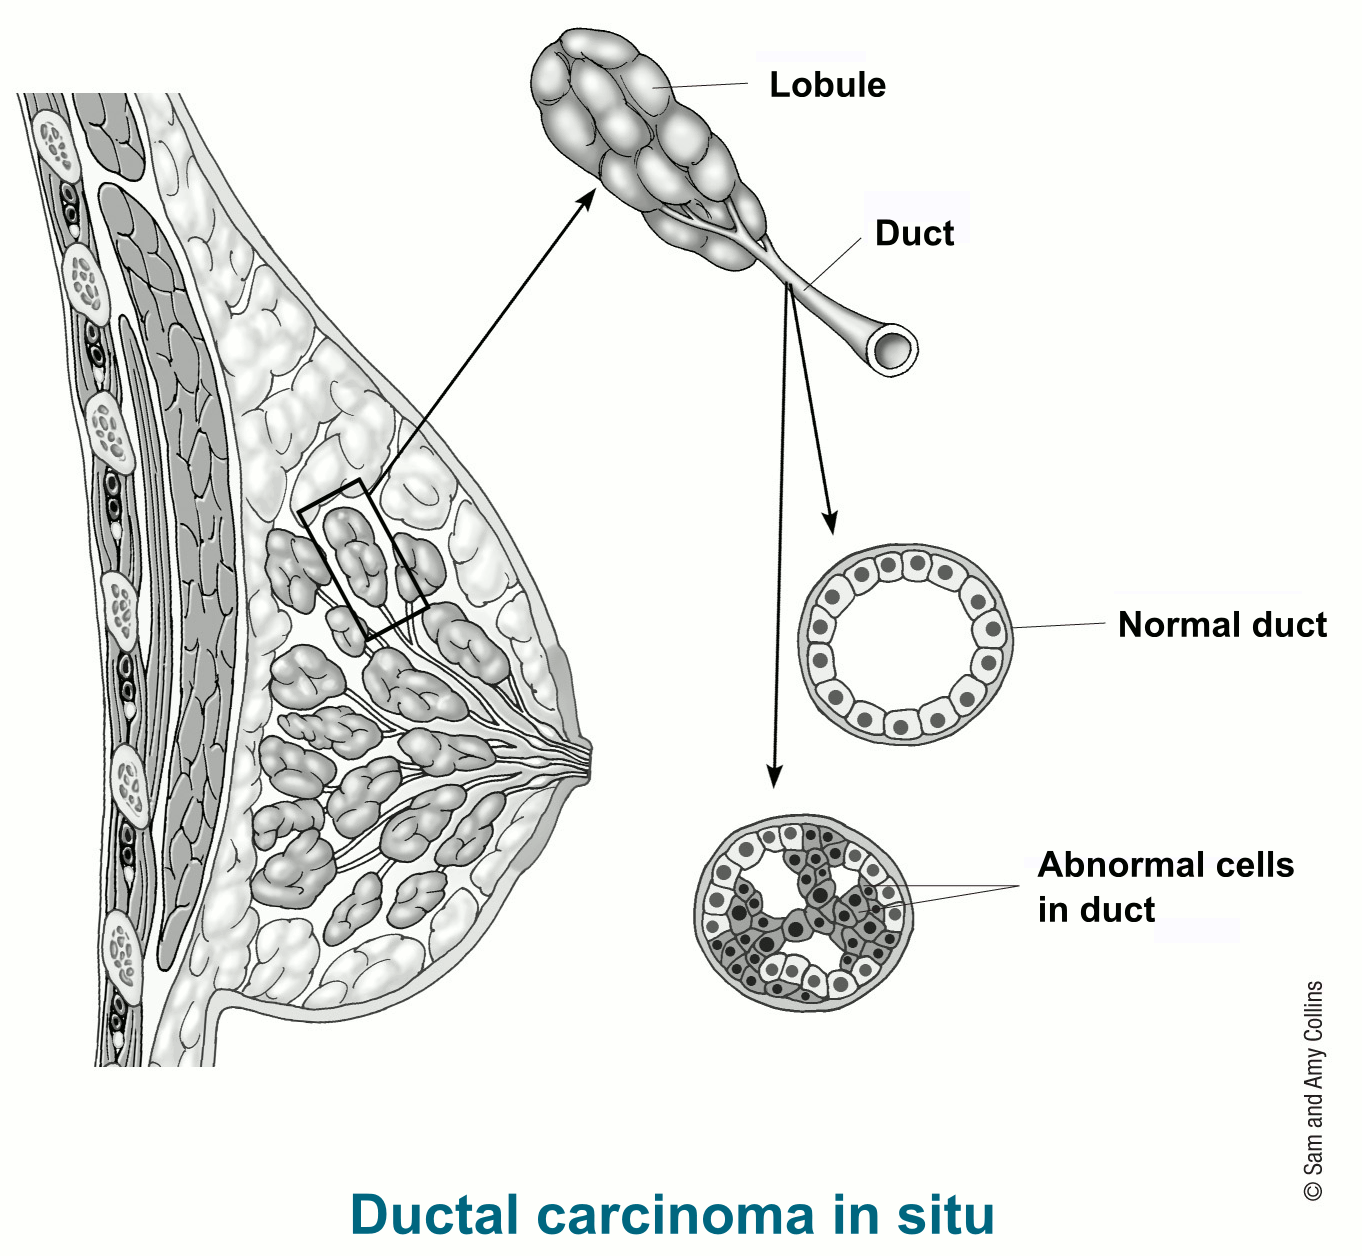 illustration showing details of ductal carcinoma in situ including lobule, duct, normal duct and abnormal cells in duct